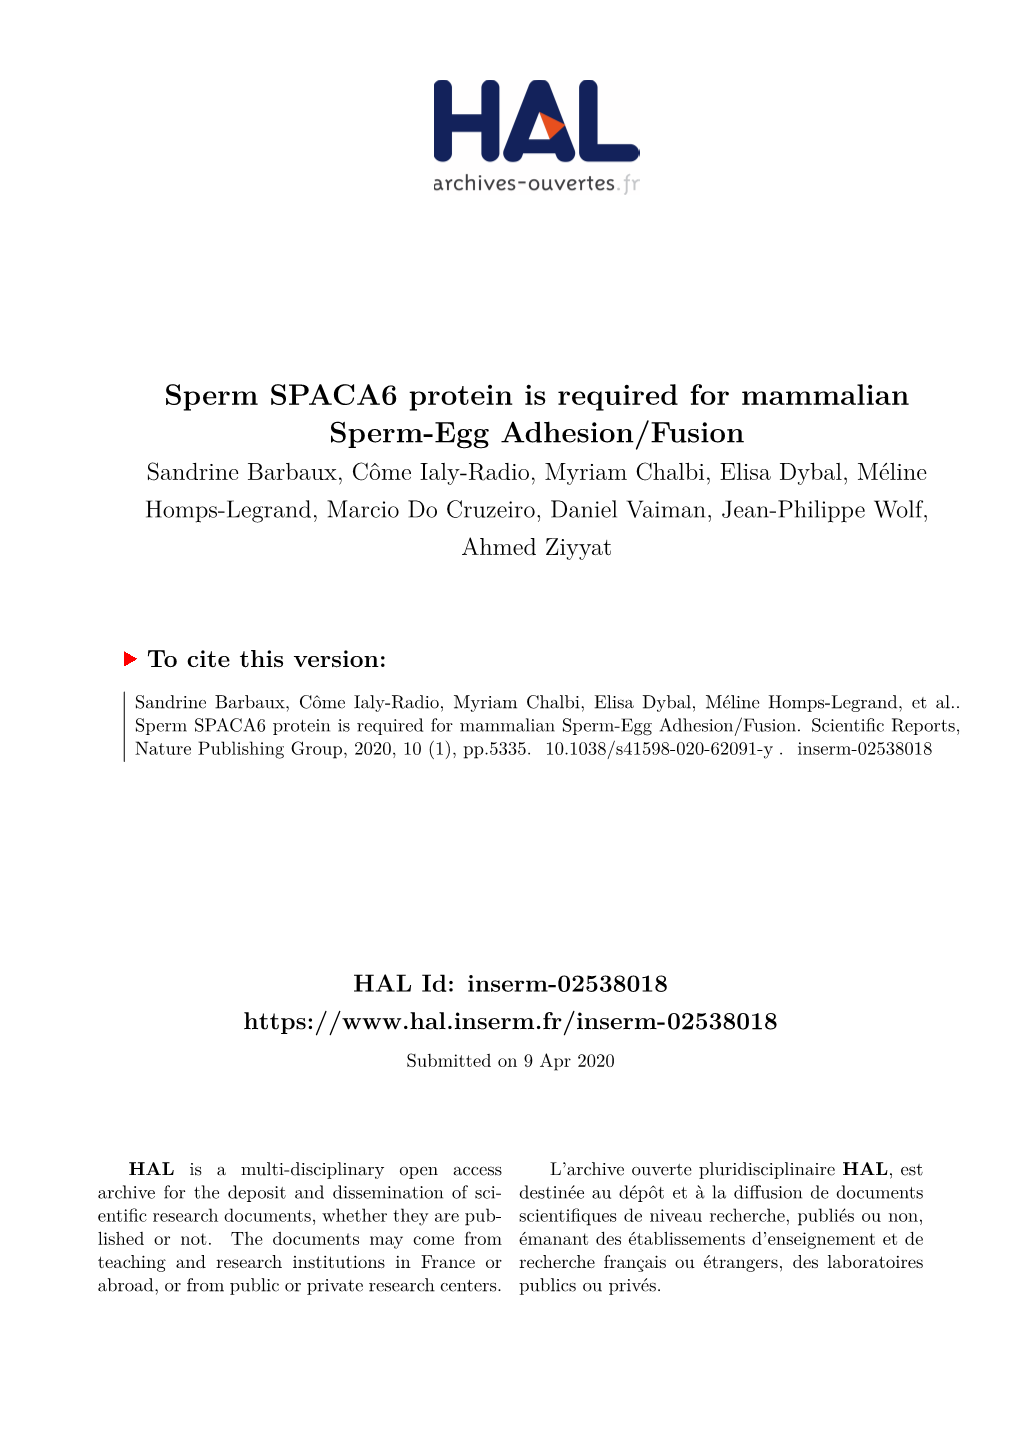 Sperm SPACA6 Protein Is Required for Mammalian Sperm-Egg Adhesion